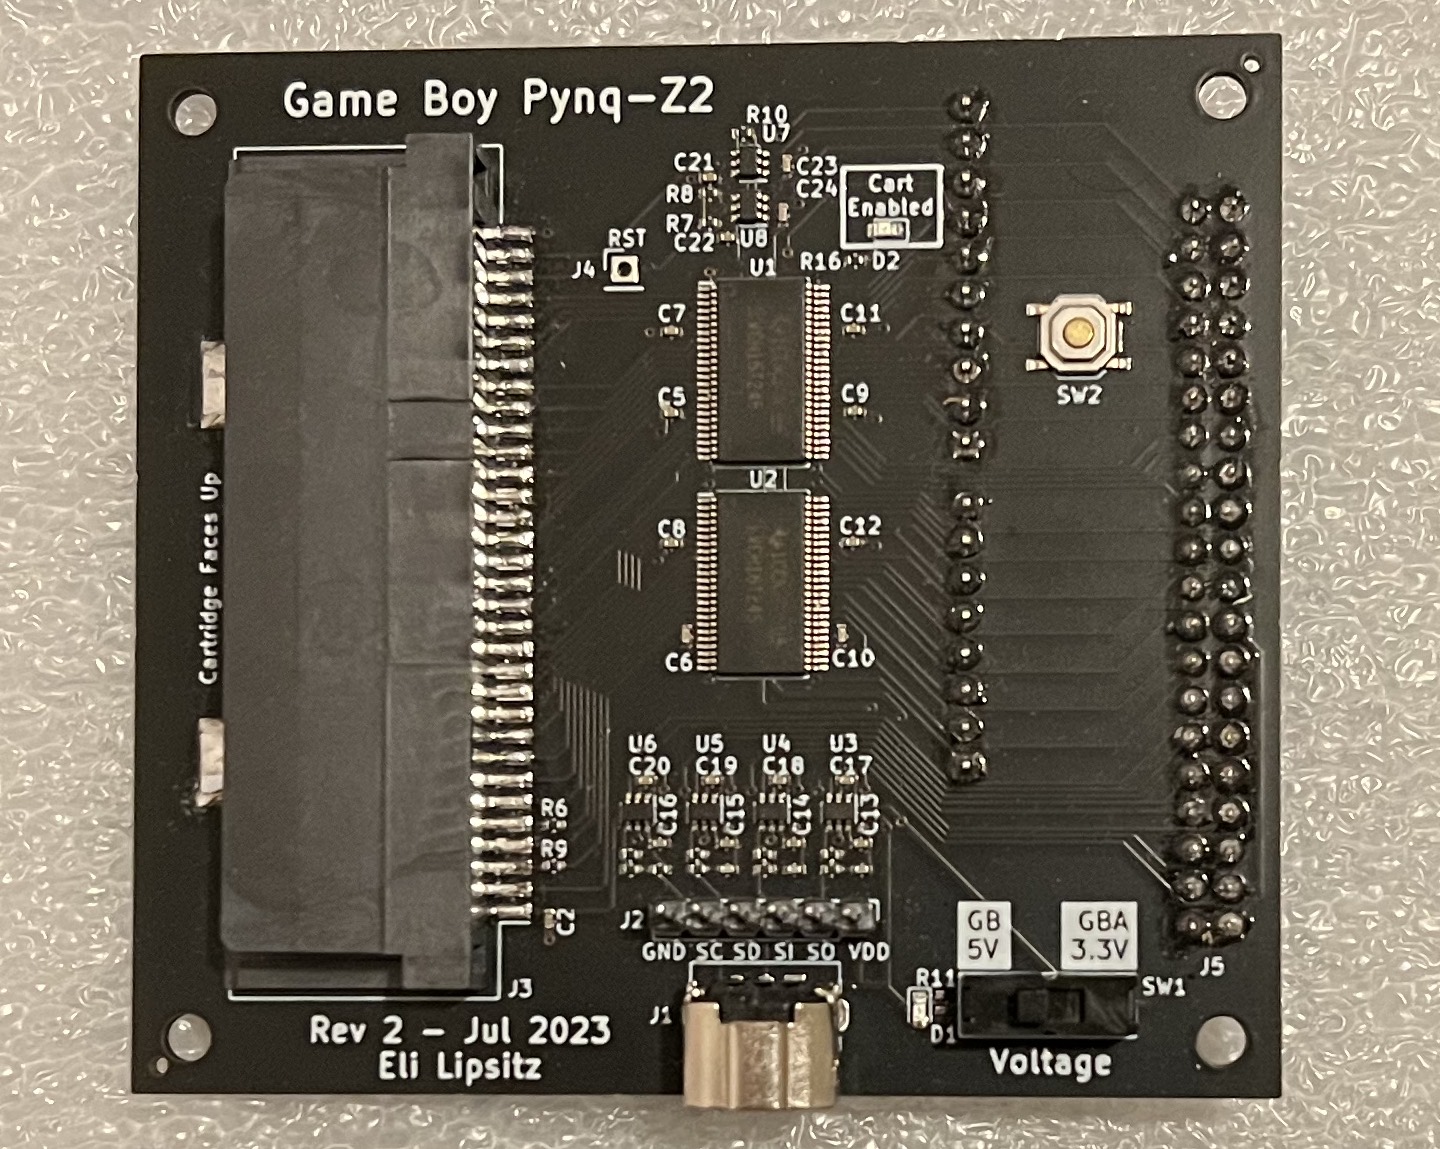 The assembled adapter board, revision 2